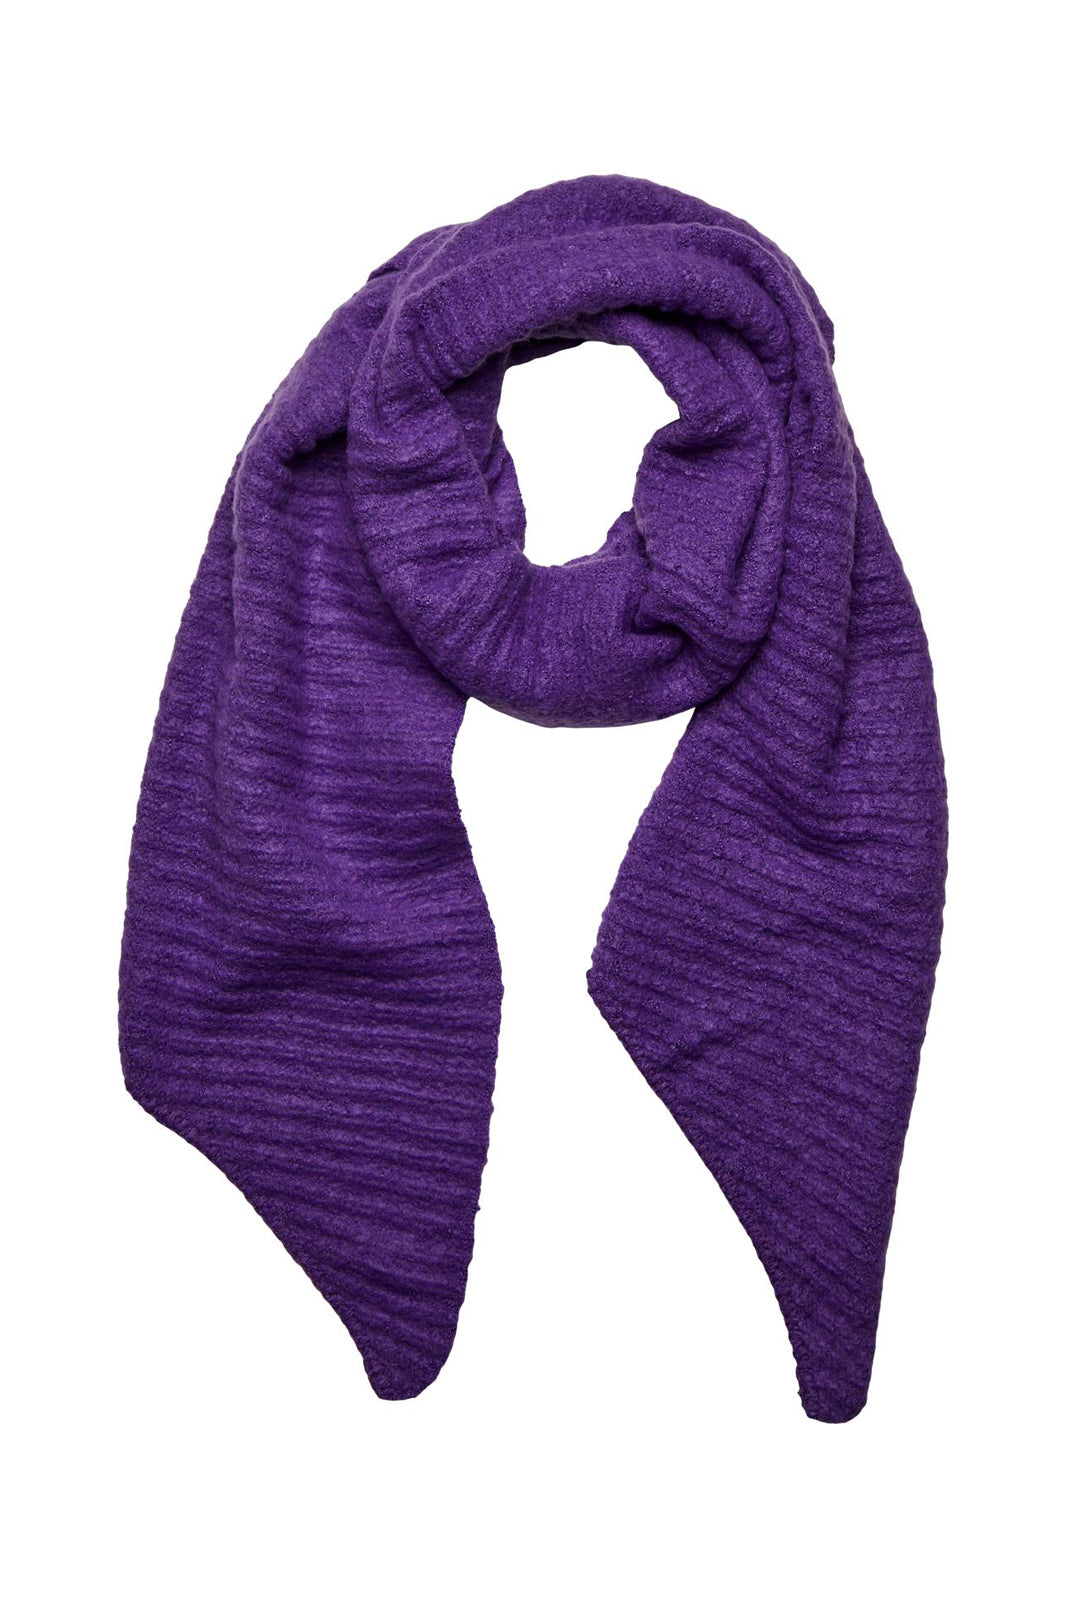 Pieces - Pcpyron Structured Long Scarf - Ultra Violet 